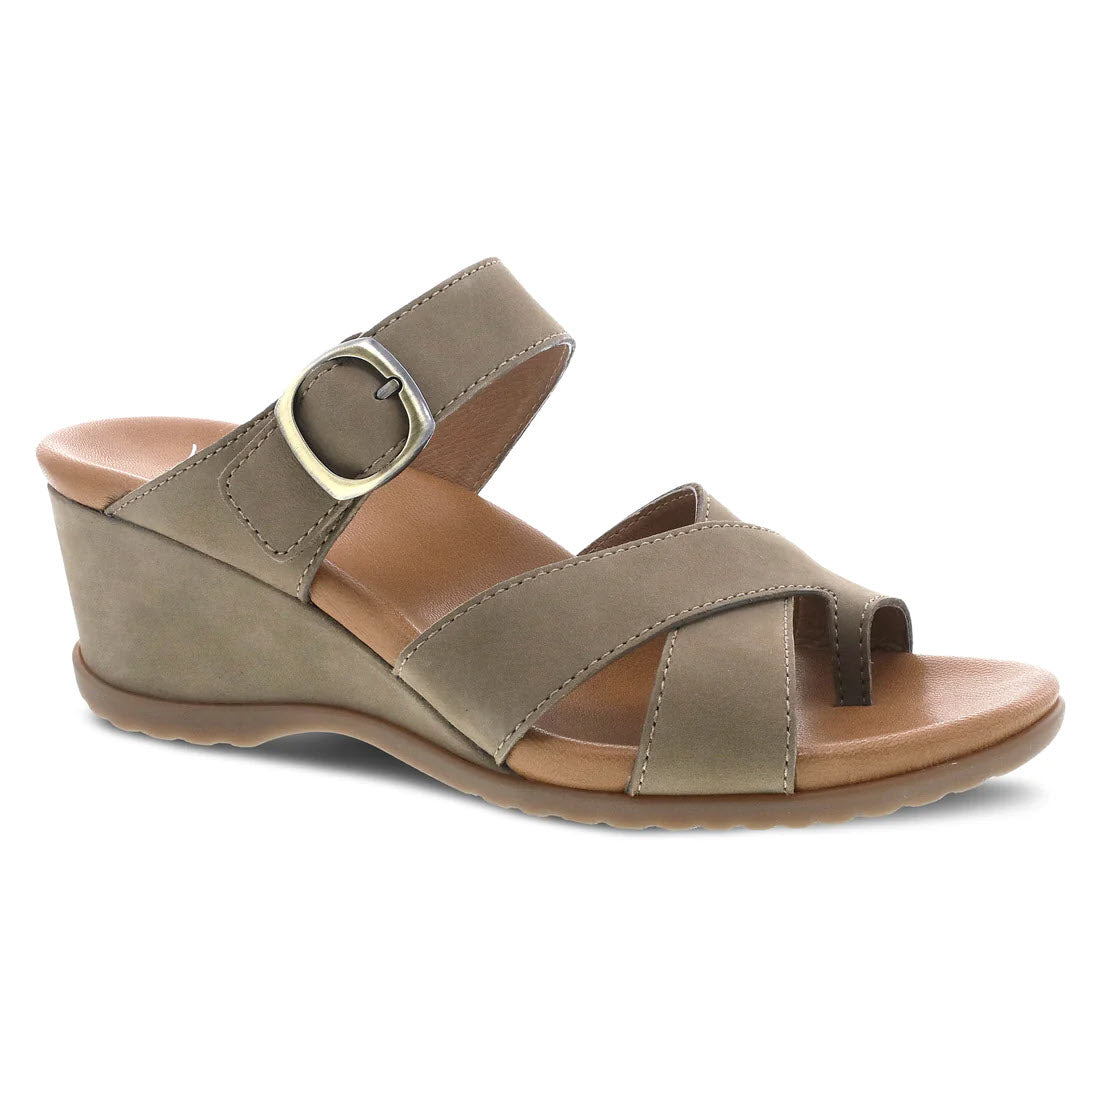 Dansko olive green open back women’s sandal with a wedge heel, multiple straps, and a circular buckle on the side.